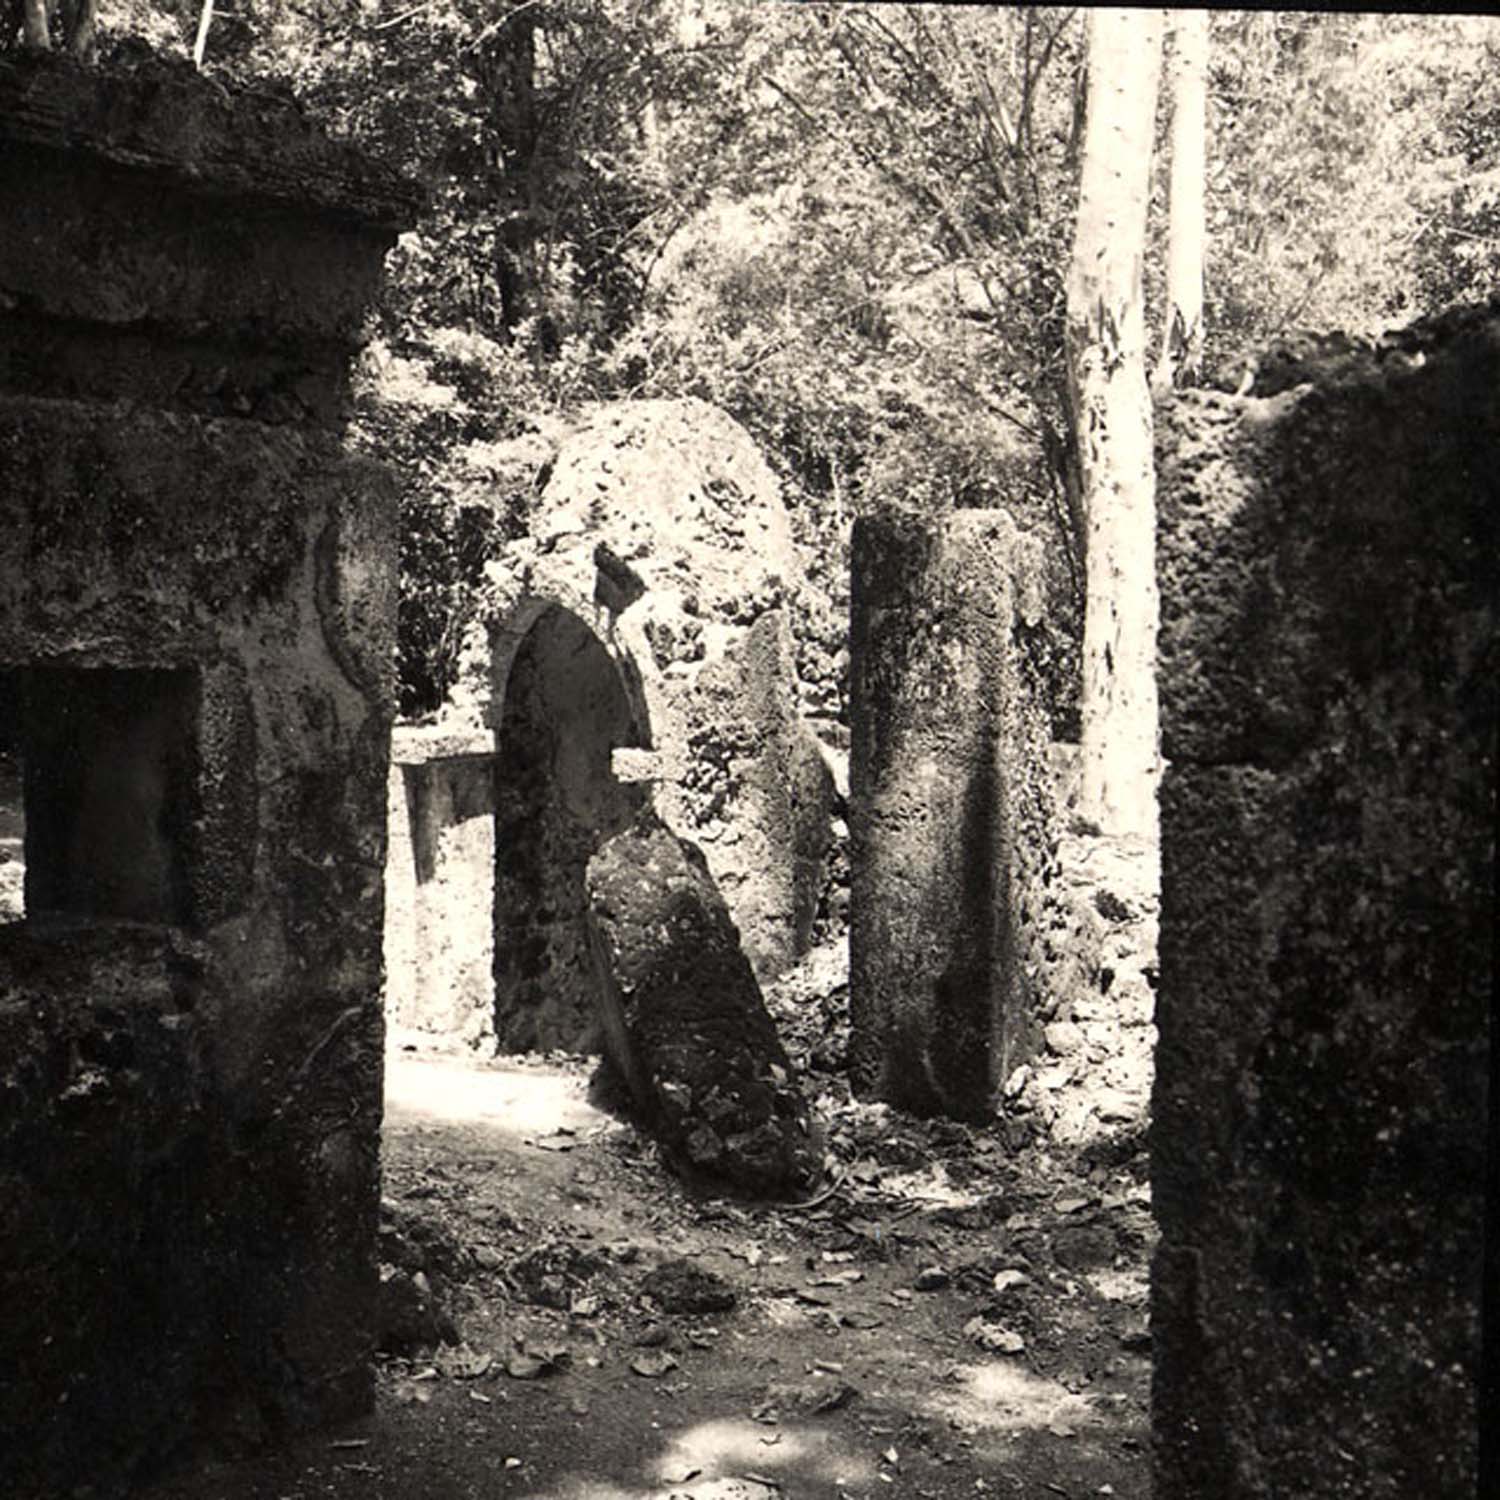 General view of the extant walls of the ruined mosque